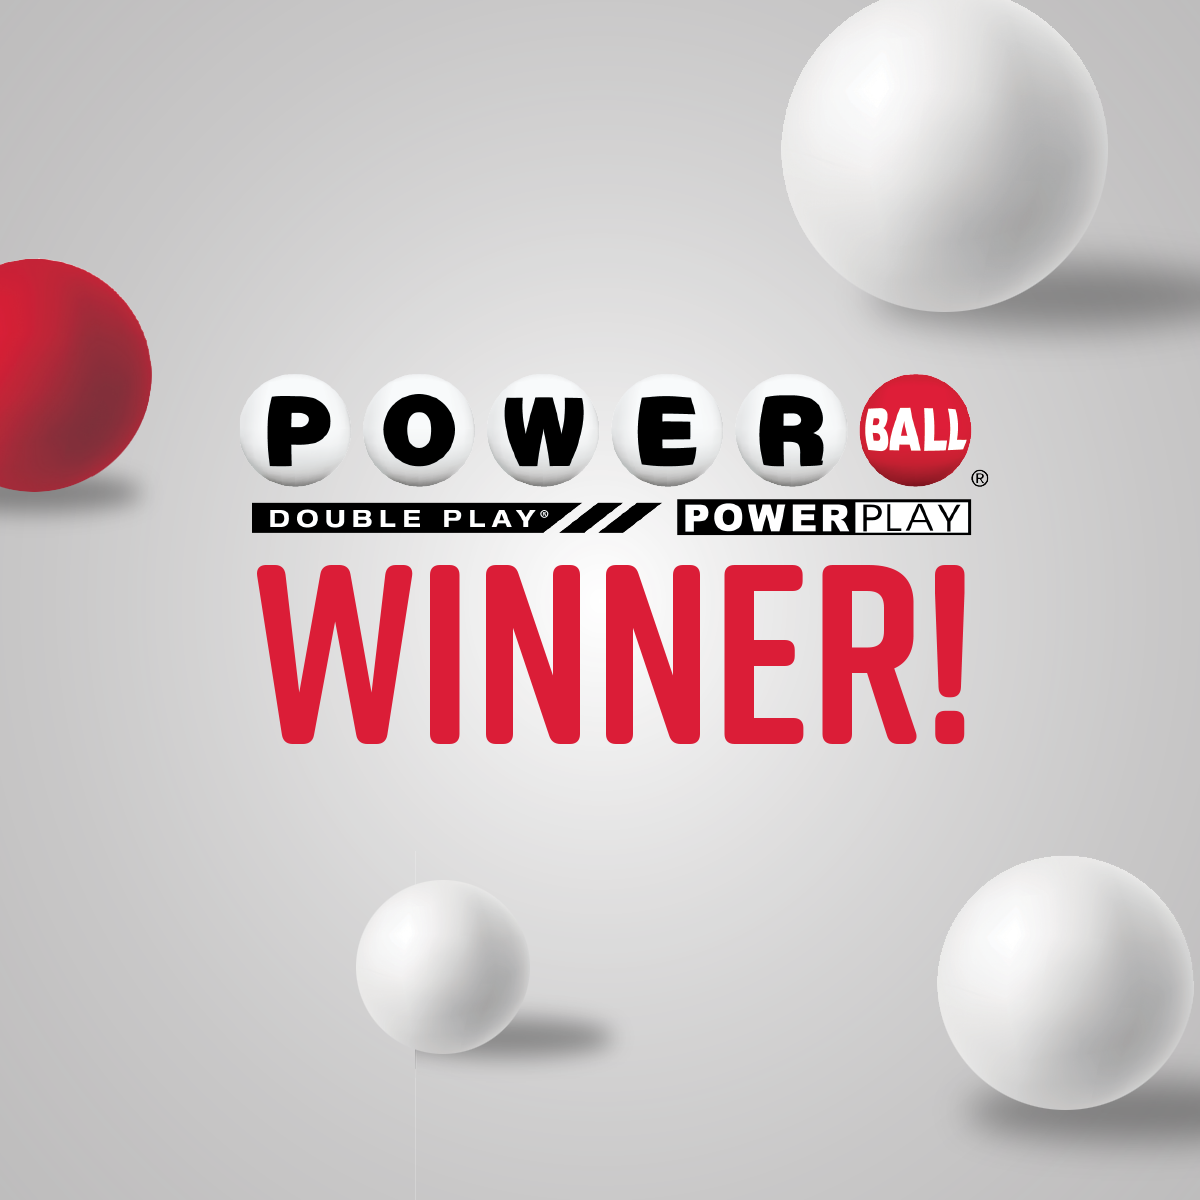 $50,000 Winning Powerball® Ticket Sold in Greenwood for Monday’s Drawing